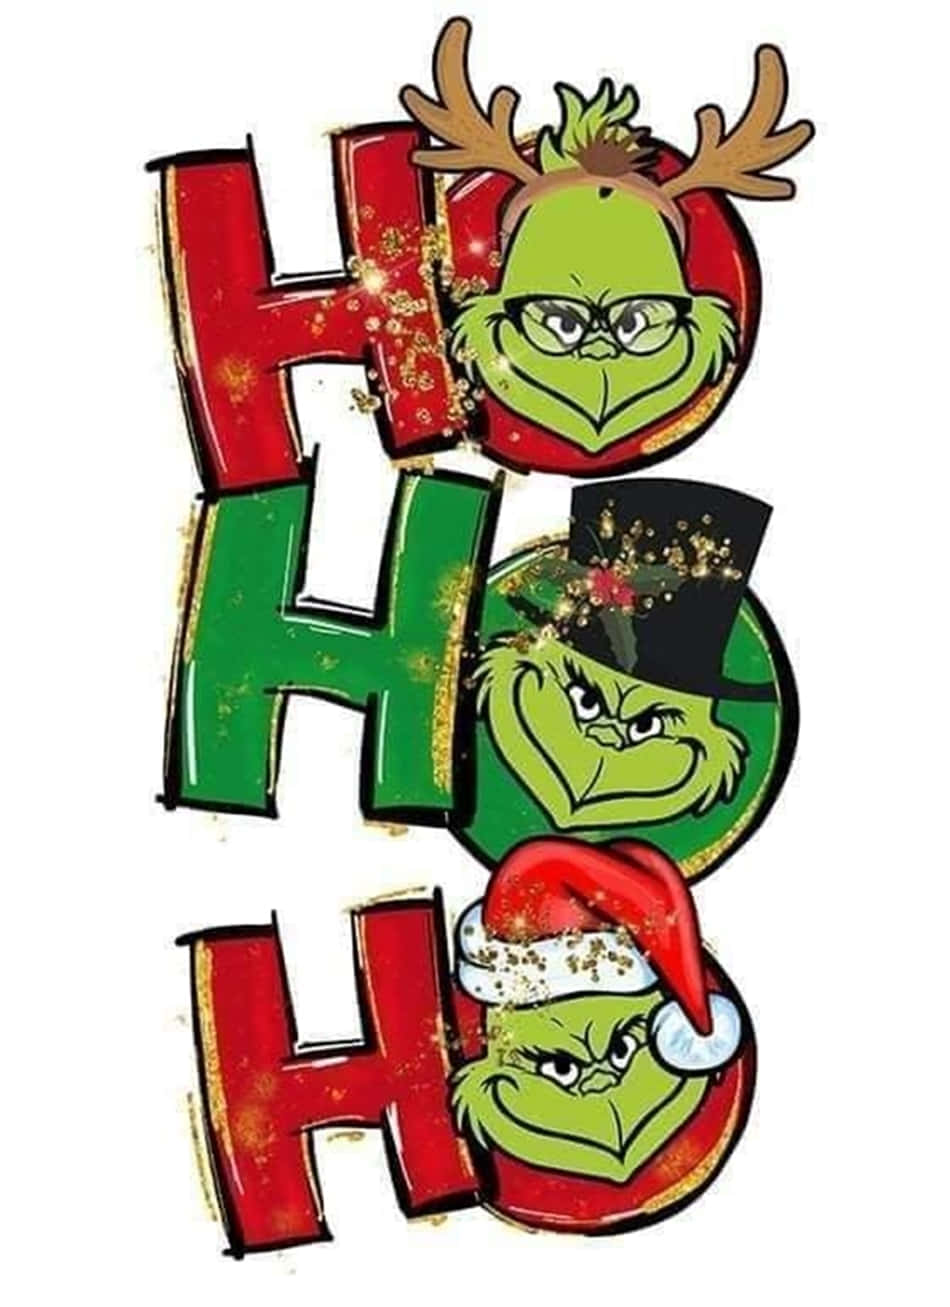 Celebrate The Grinch's Christmas With This Festive Iphone Wallpaper Wallpaper